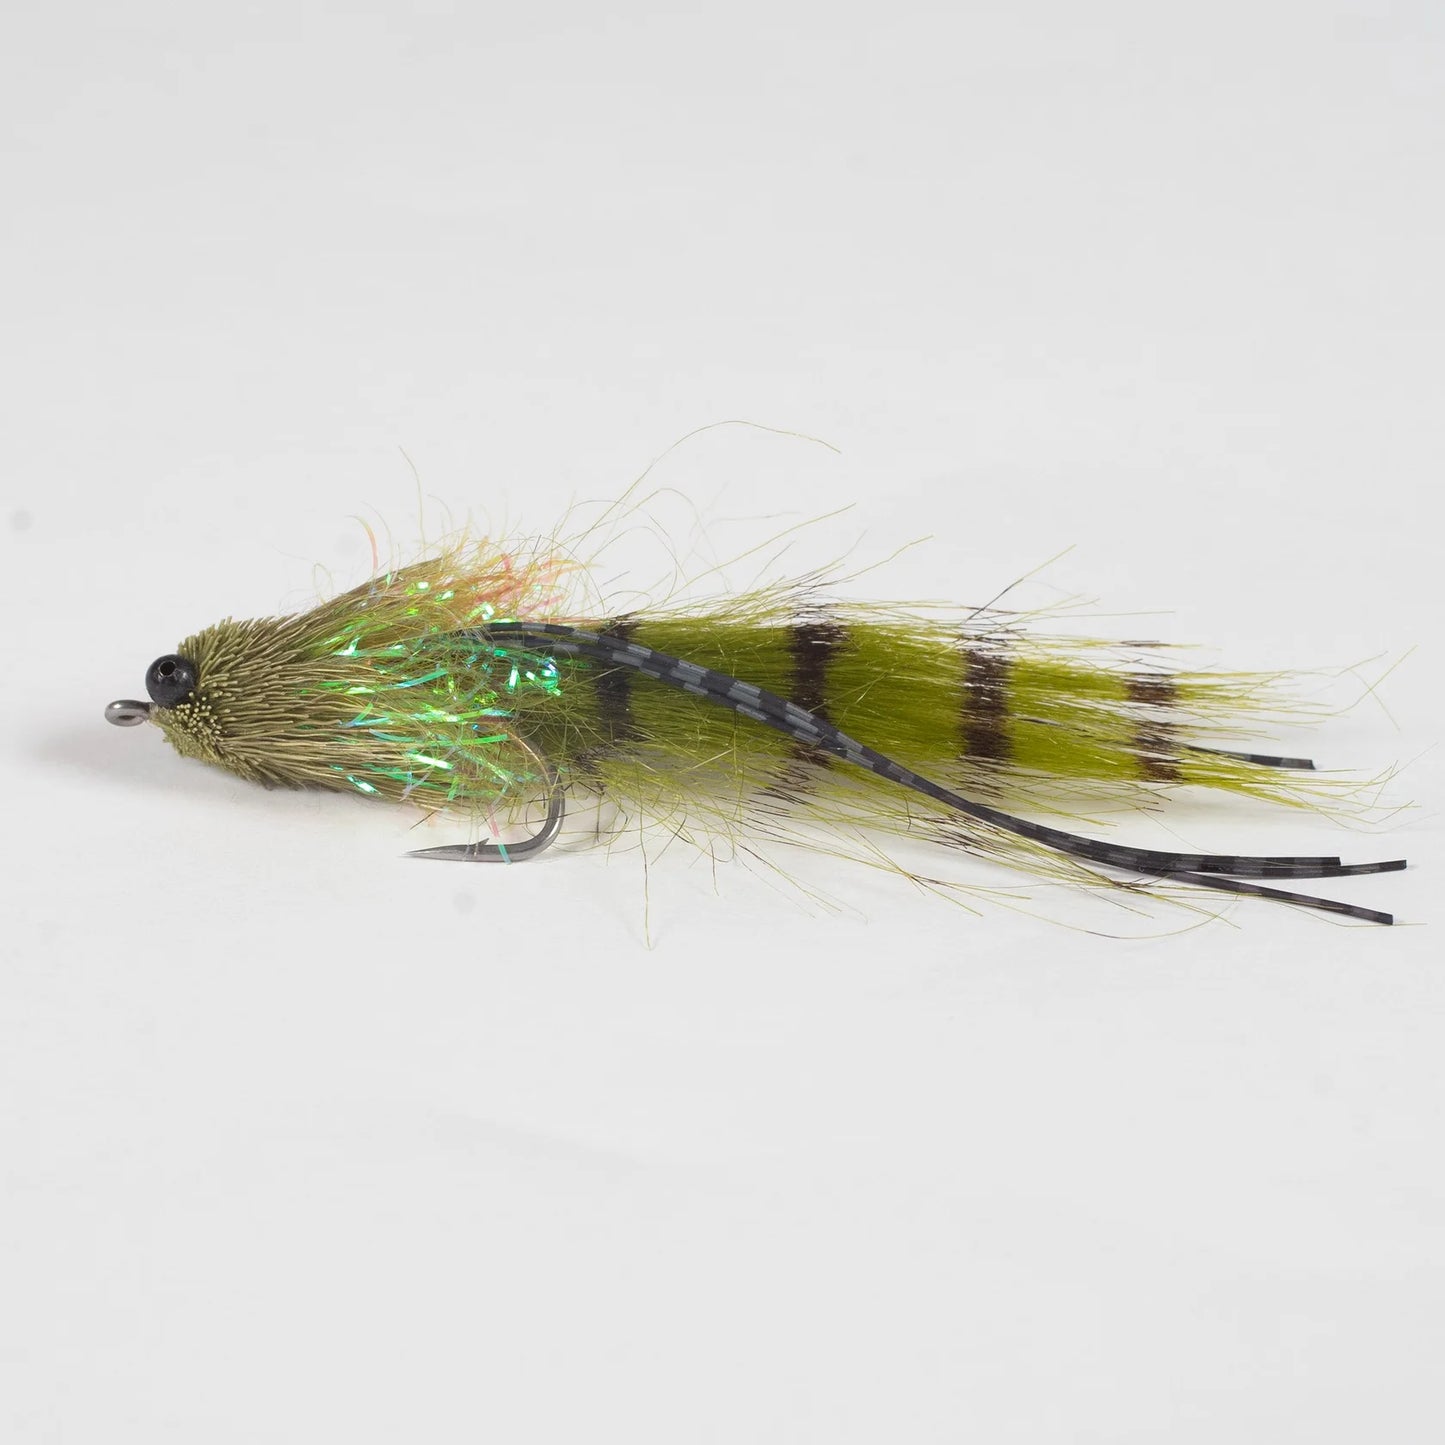 Blue Line Co. Flies Collection II